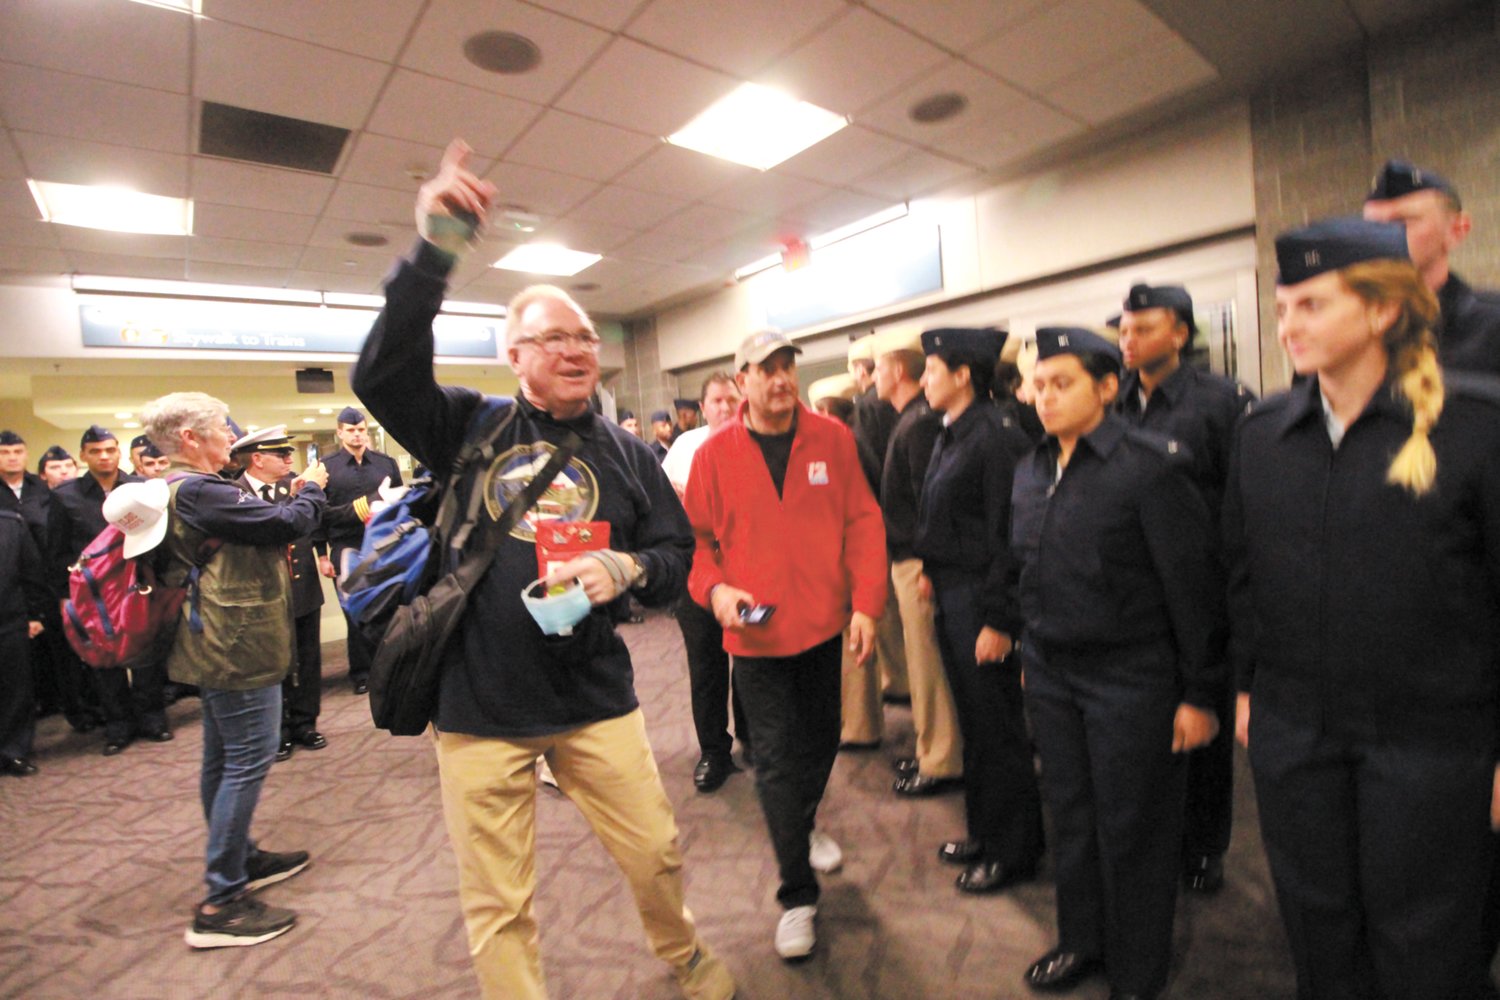 STRIKE UP THE BAND: Signaling that members of Flight Thunderbolt held Oct. 15  are entering the terminal, George Farrell calls on the pipes and drums to play.